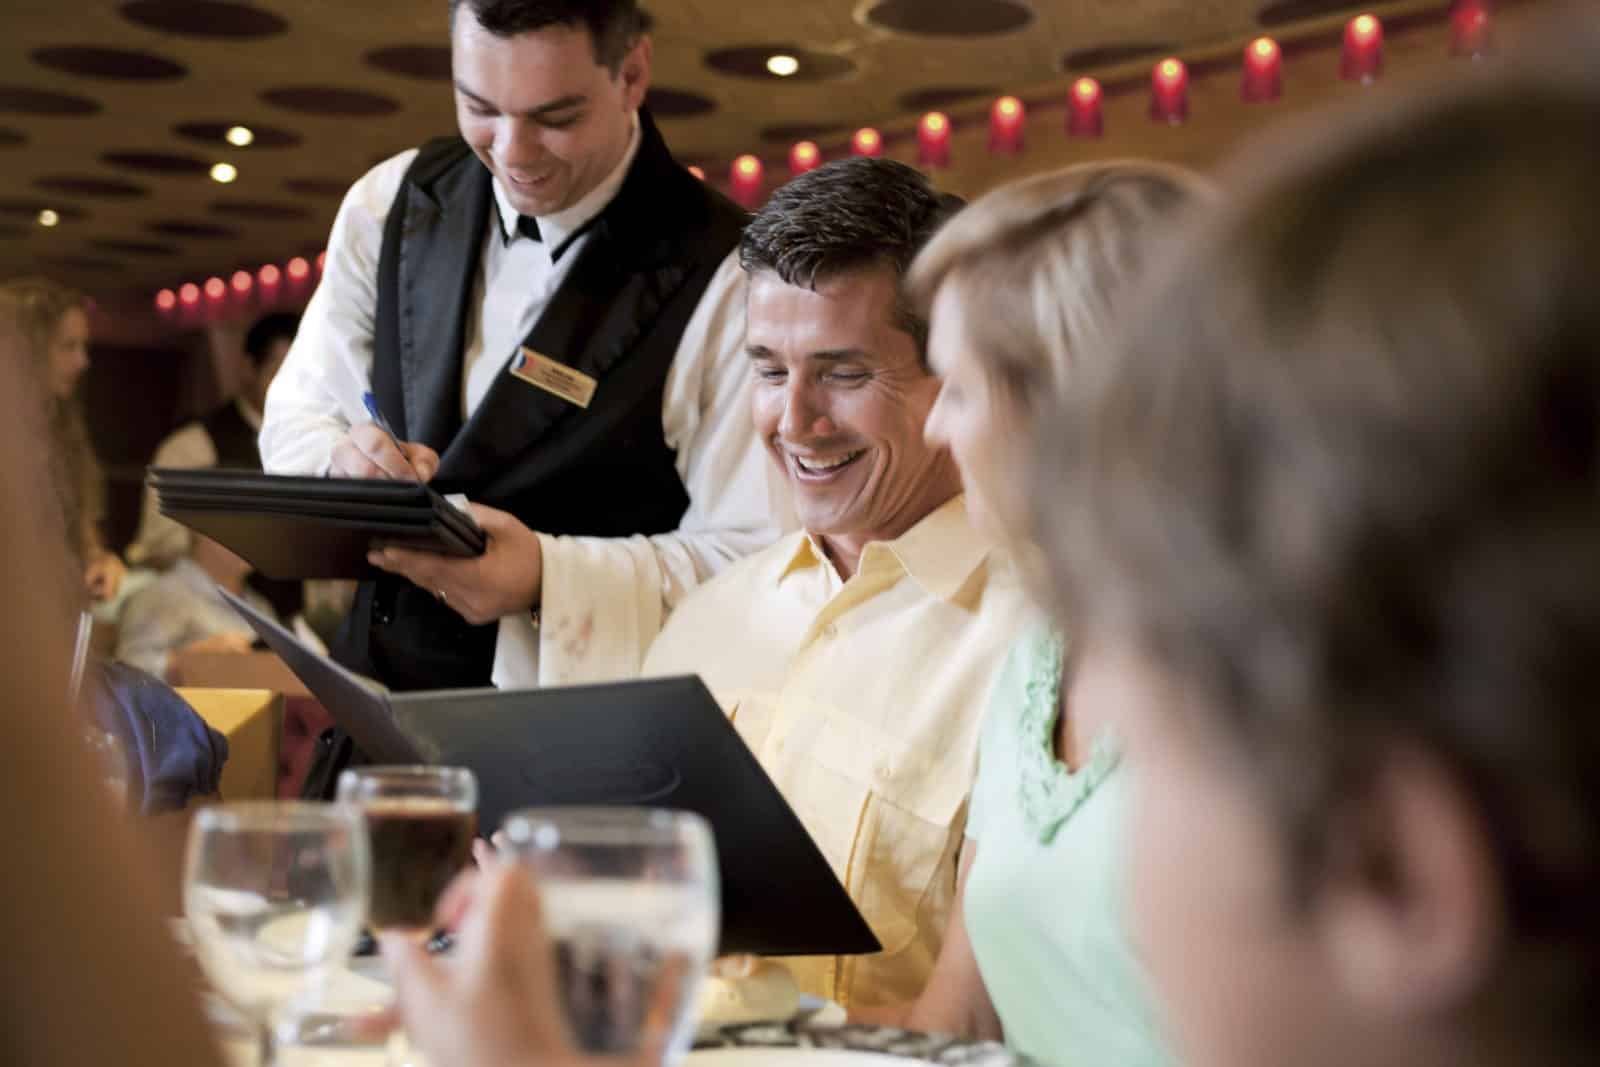 ALT Description: A friendly cruise waiter in a crisp uniform stands attentively beside a well-set table on a luxurious cruise ship. The table is adorned with elegant dinnerware and sparkling glassware, ready to cater to the guests' dining needs. The waiter wears a warm smile, exuding professionalism and hospitality. In the background, the vast expanse of the ocean stretches out, reflecting the serene ambiance of the cruise experience. This image captures the essence of cruising as a premier mode of travel, highlighting the exceptional service, exquisite dining, and breathtaking views that make it a truly unforgettable journey.